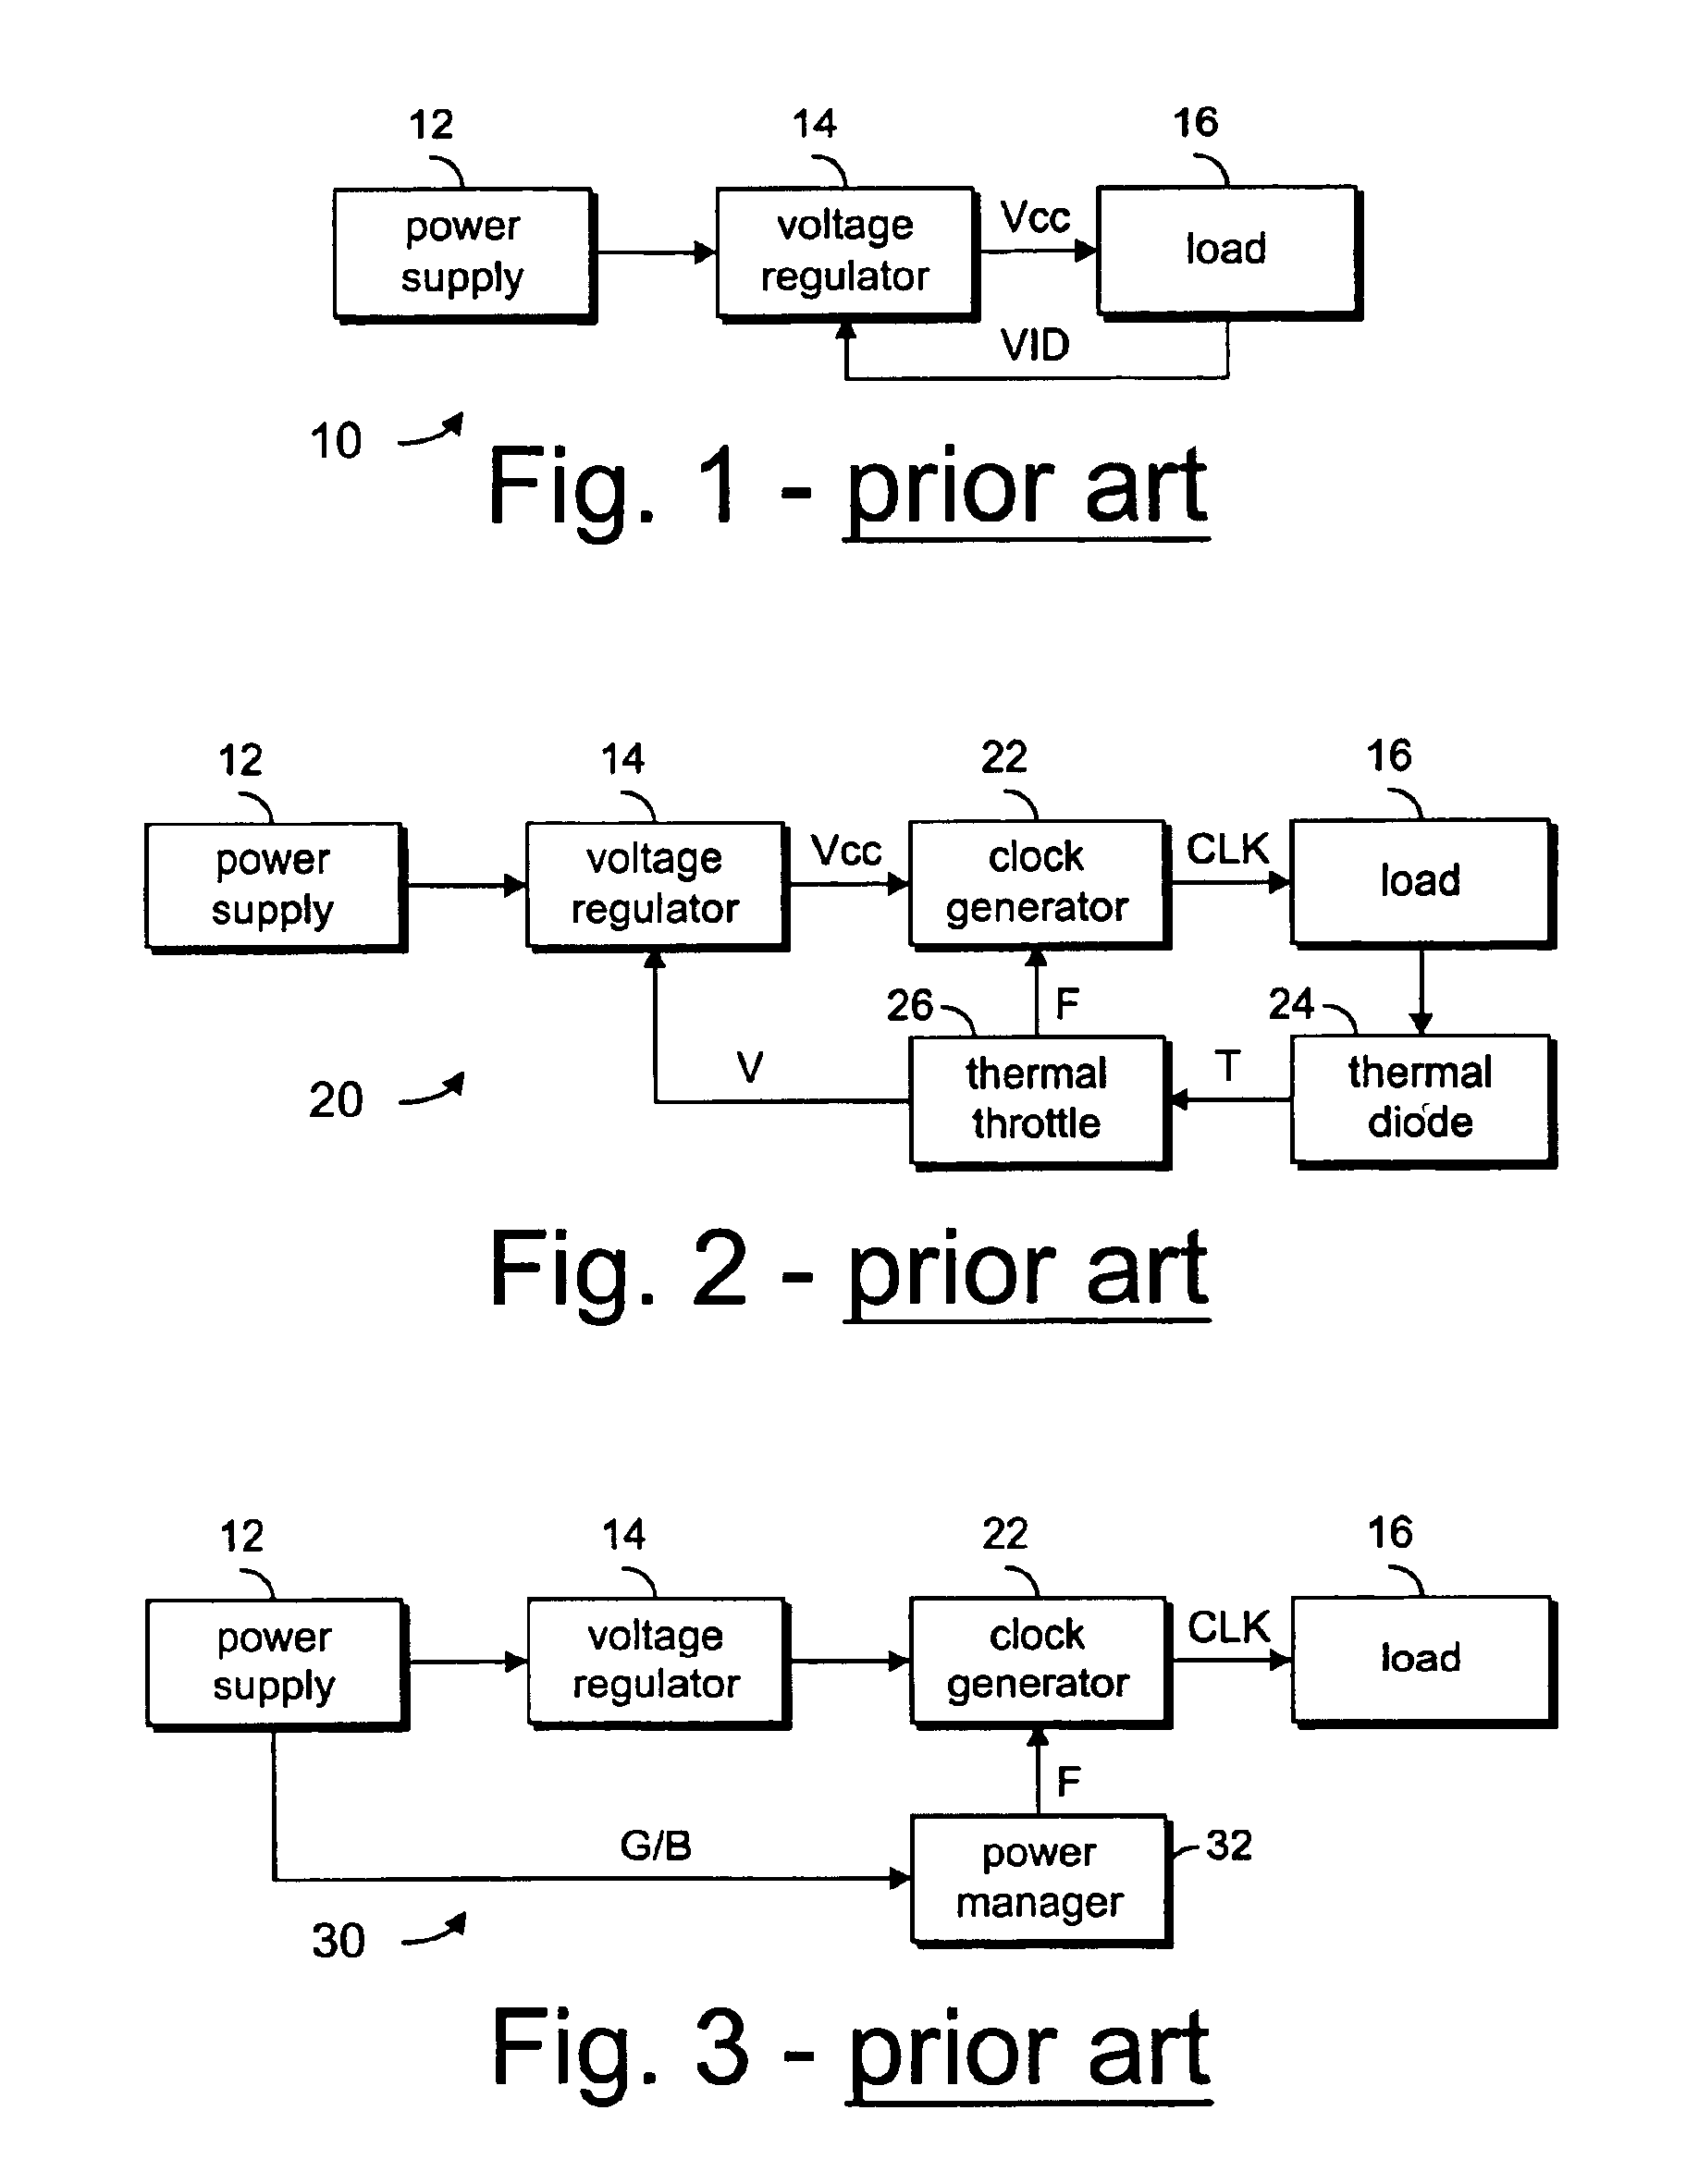 Altering operating frequency and voltage set point of a circuit in response to the operating temperature and instantaneous operating voltage of the circuit